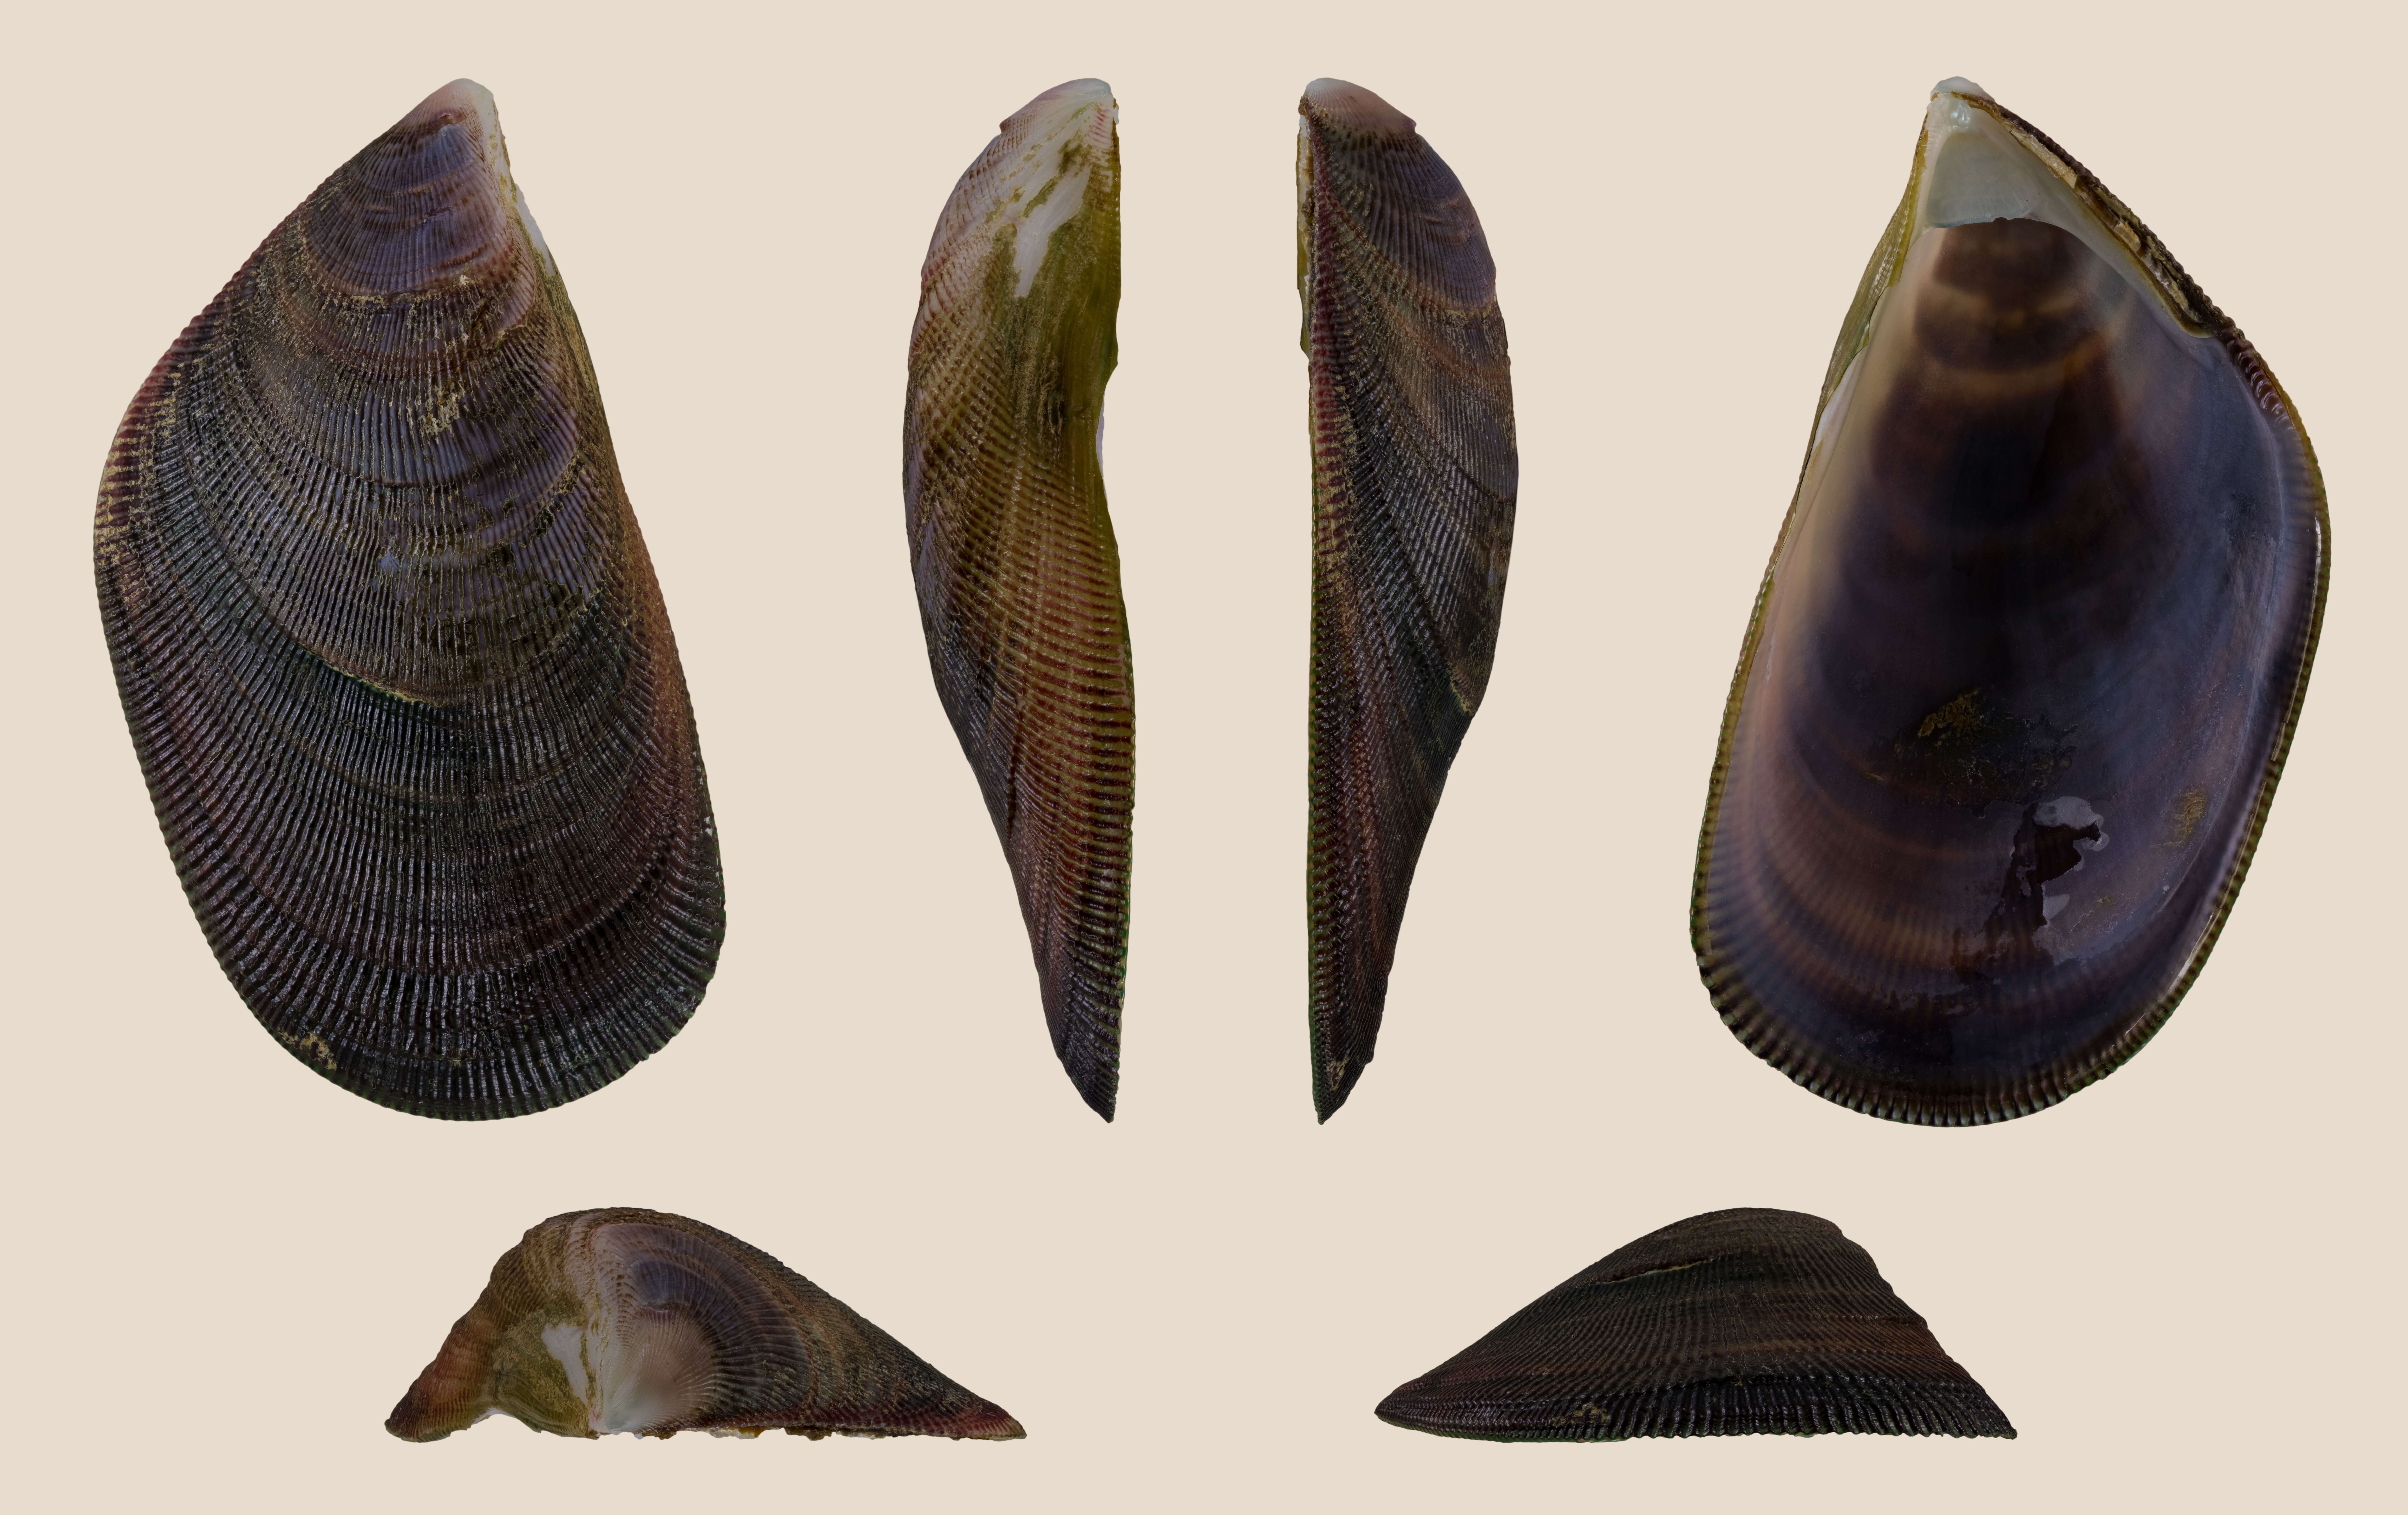 Image of ledge mussel